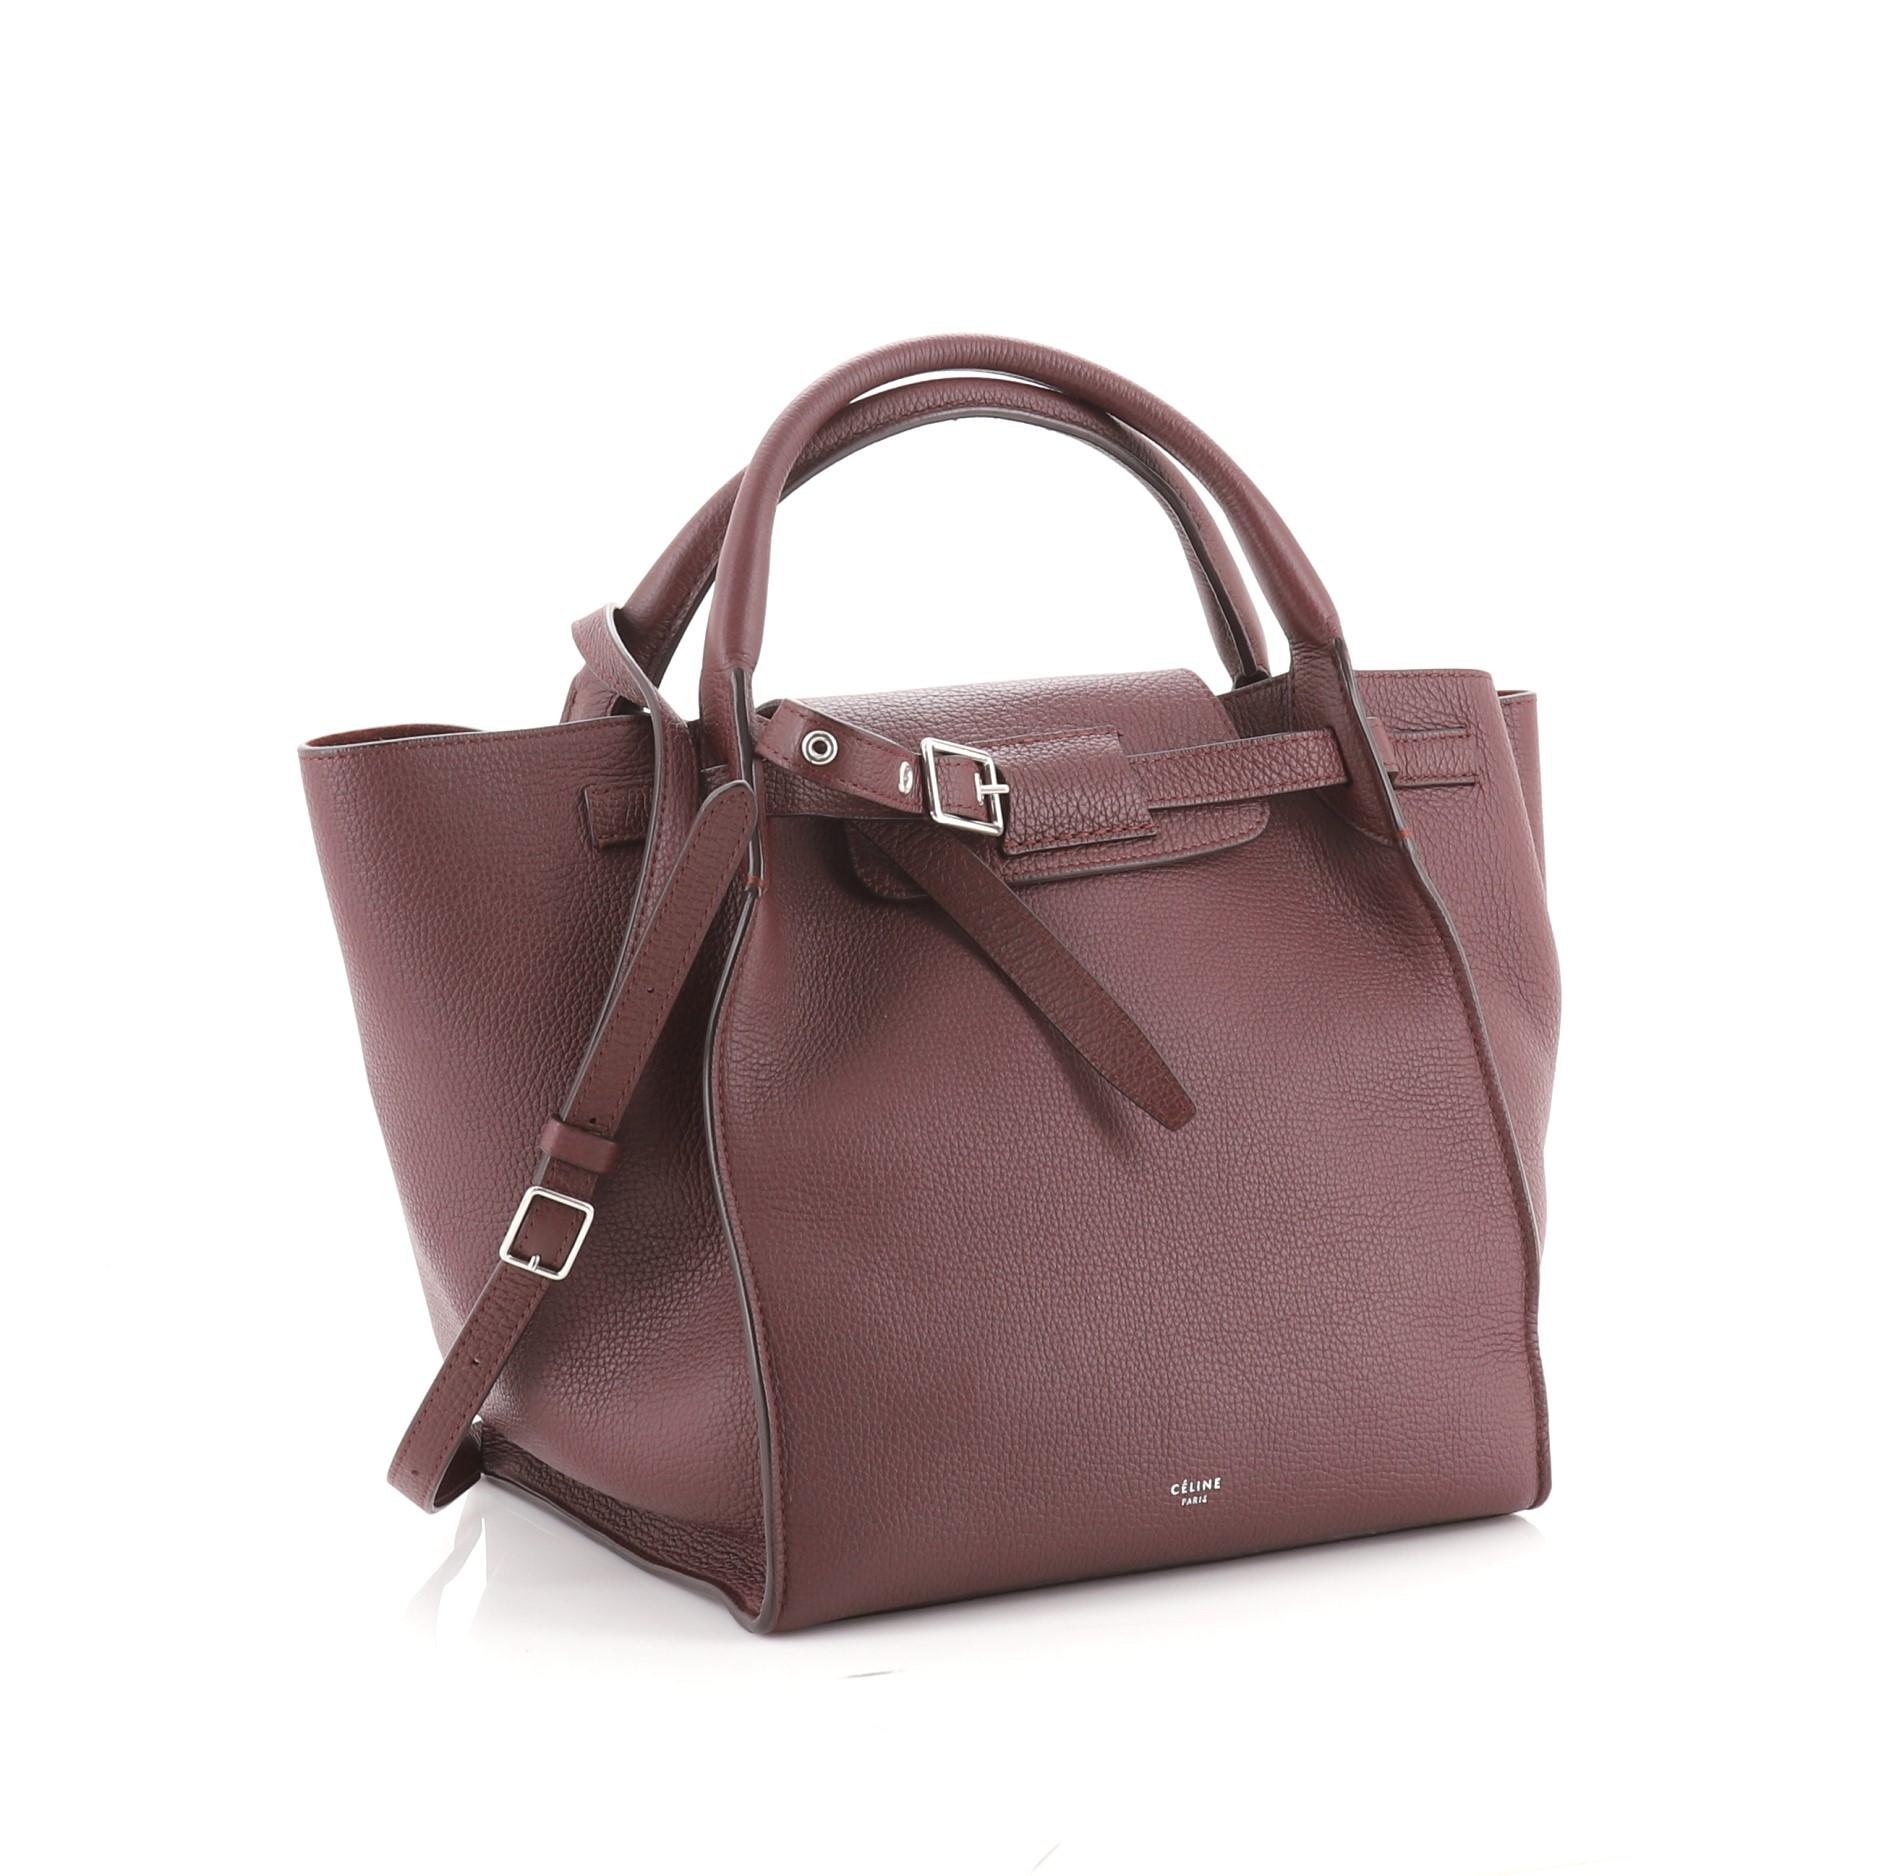 Celine Big Bag Grained Calfskin Small
Burgundy Grained Calfskin

Condition Details: Creasing on exterior, minor wear on handles and in interior, scratches on hardware.

49850MSC

Height 10